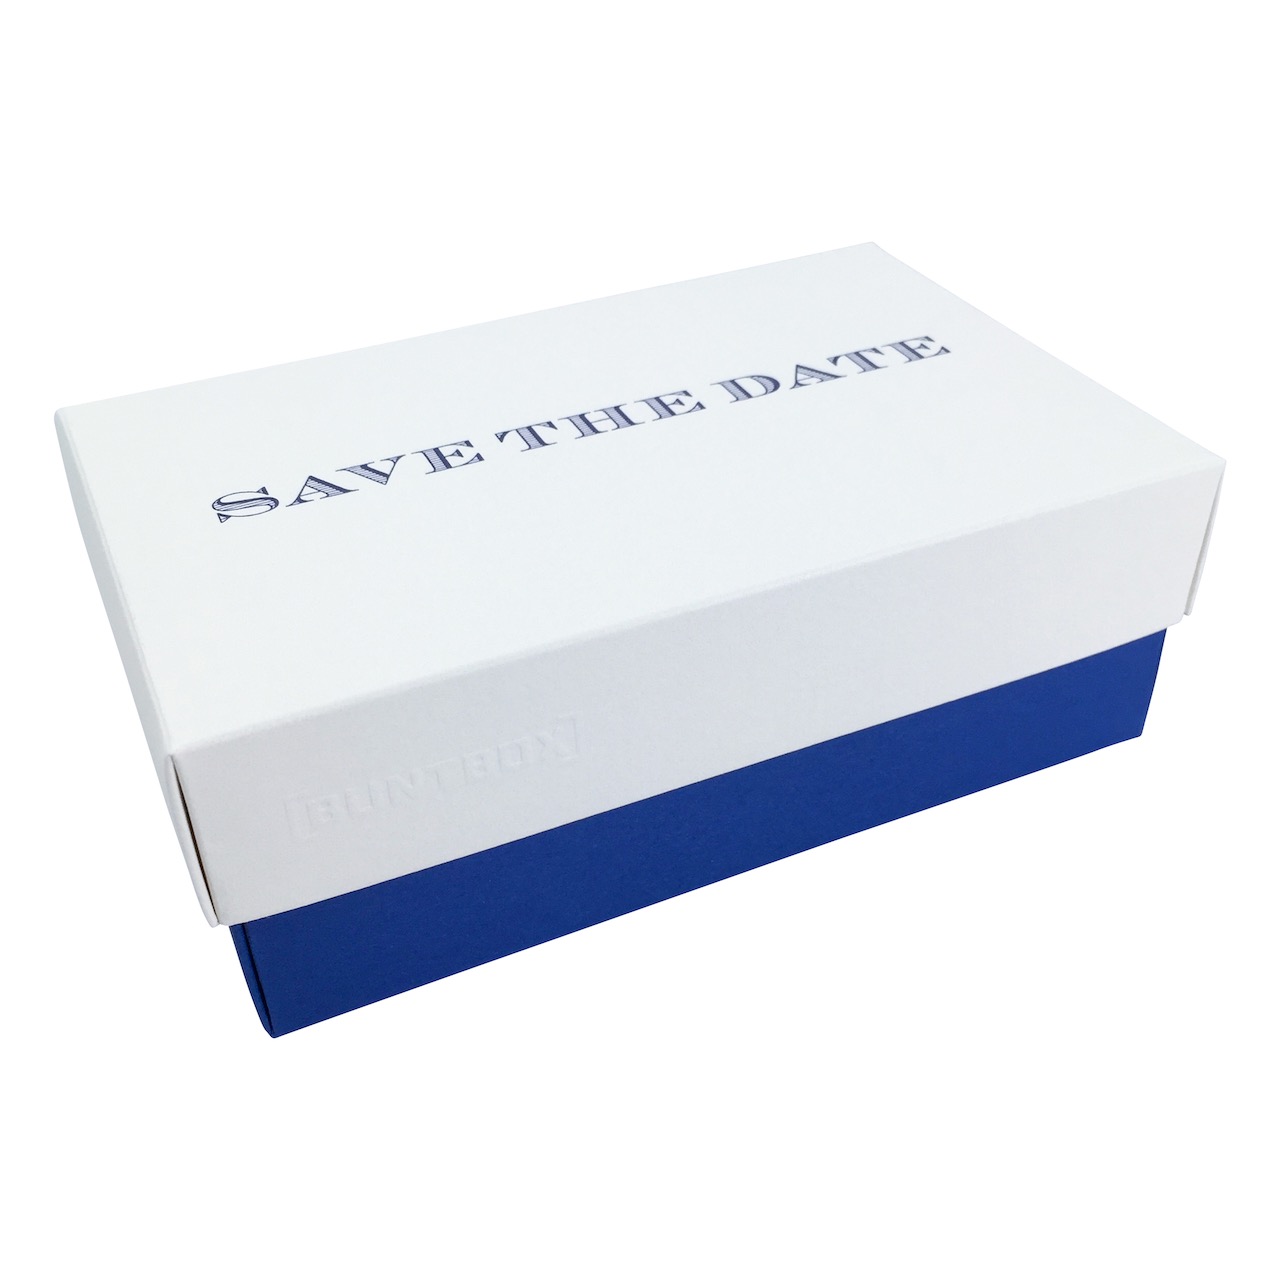 Fine Paper Edition Buntbox Champagne - Bordeaux 'Save the Date' - Red